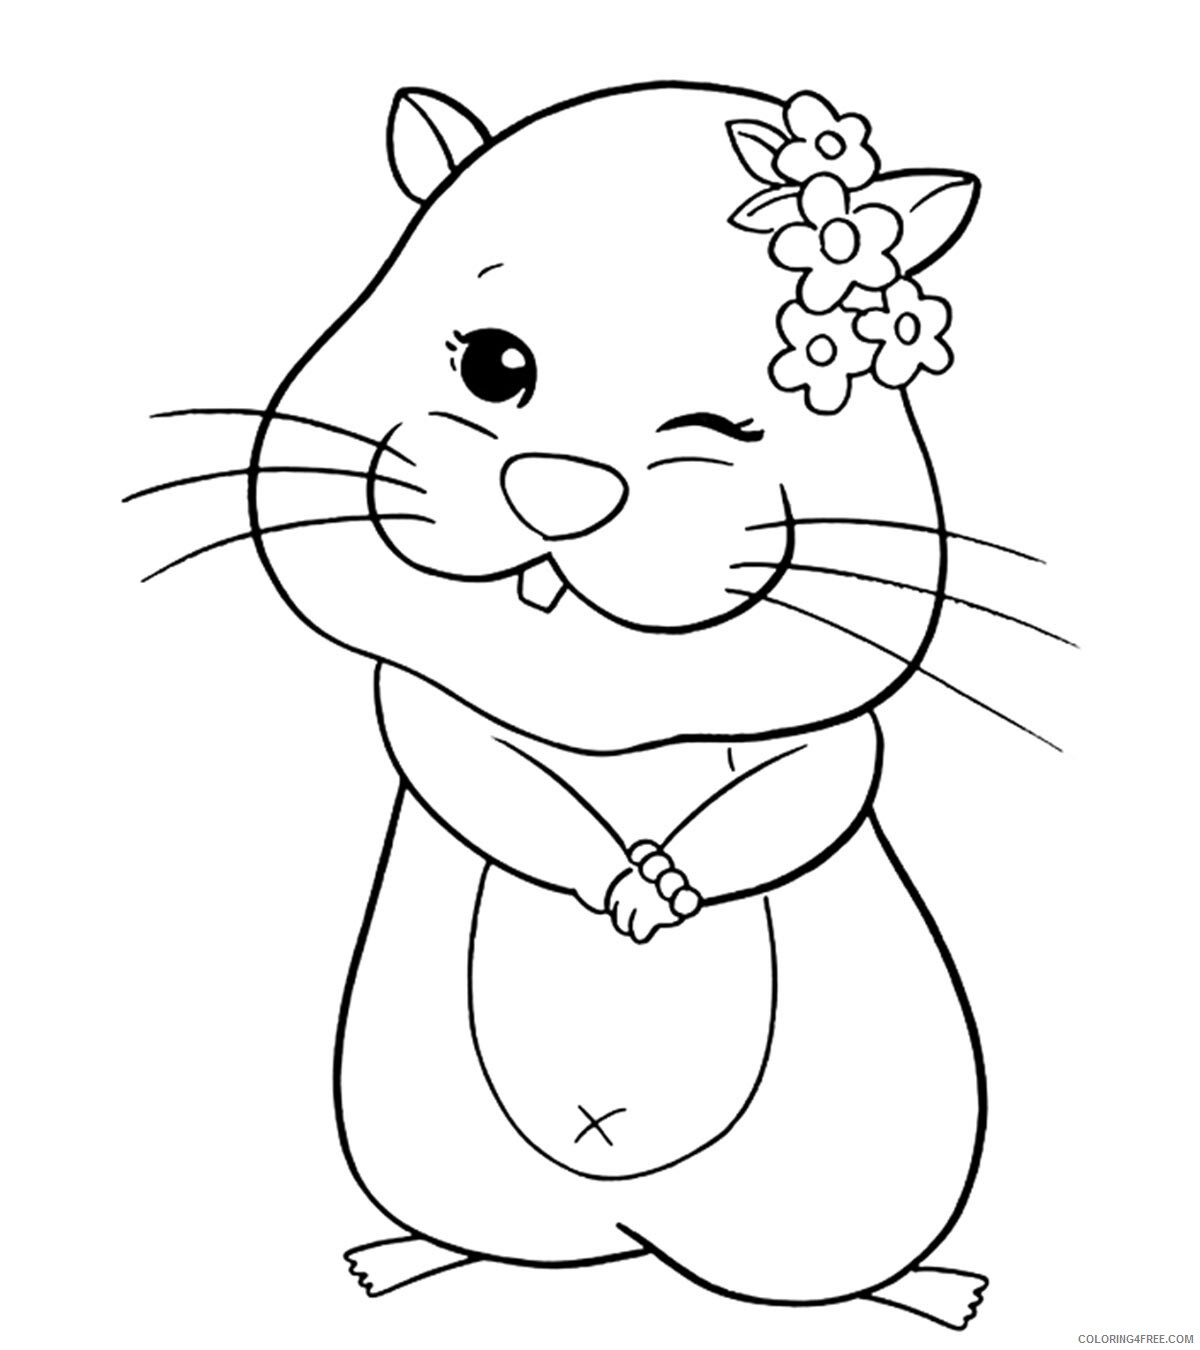 Hamster Coloring Pages Animal Printable Sheets Sweet Hamster 2021 2585 Coloring4free